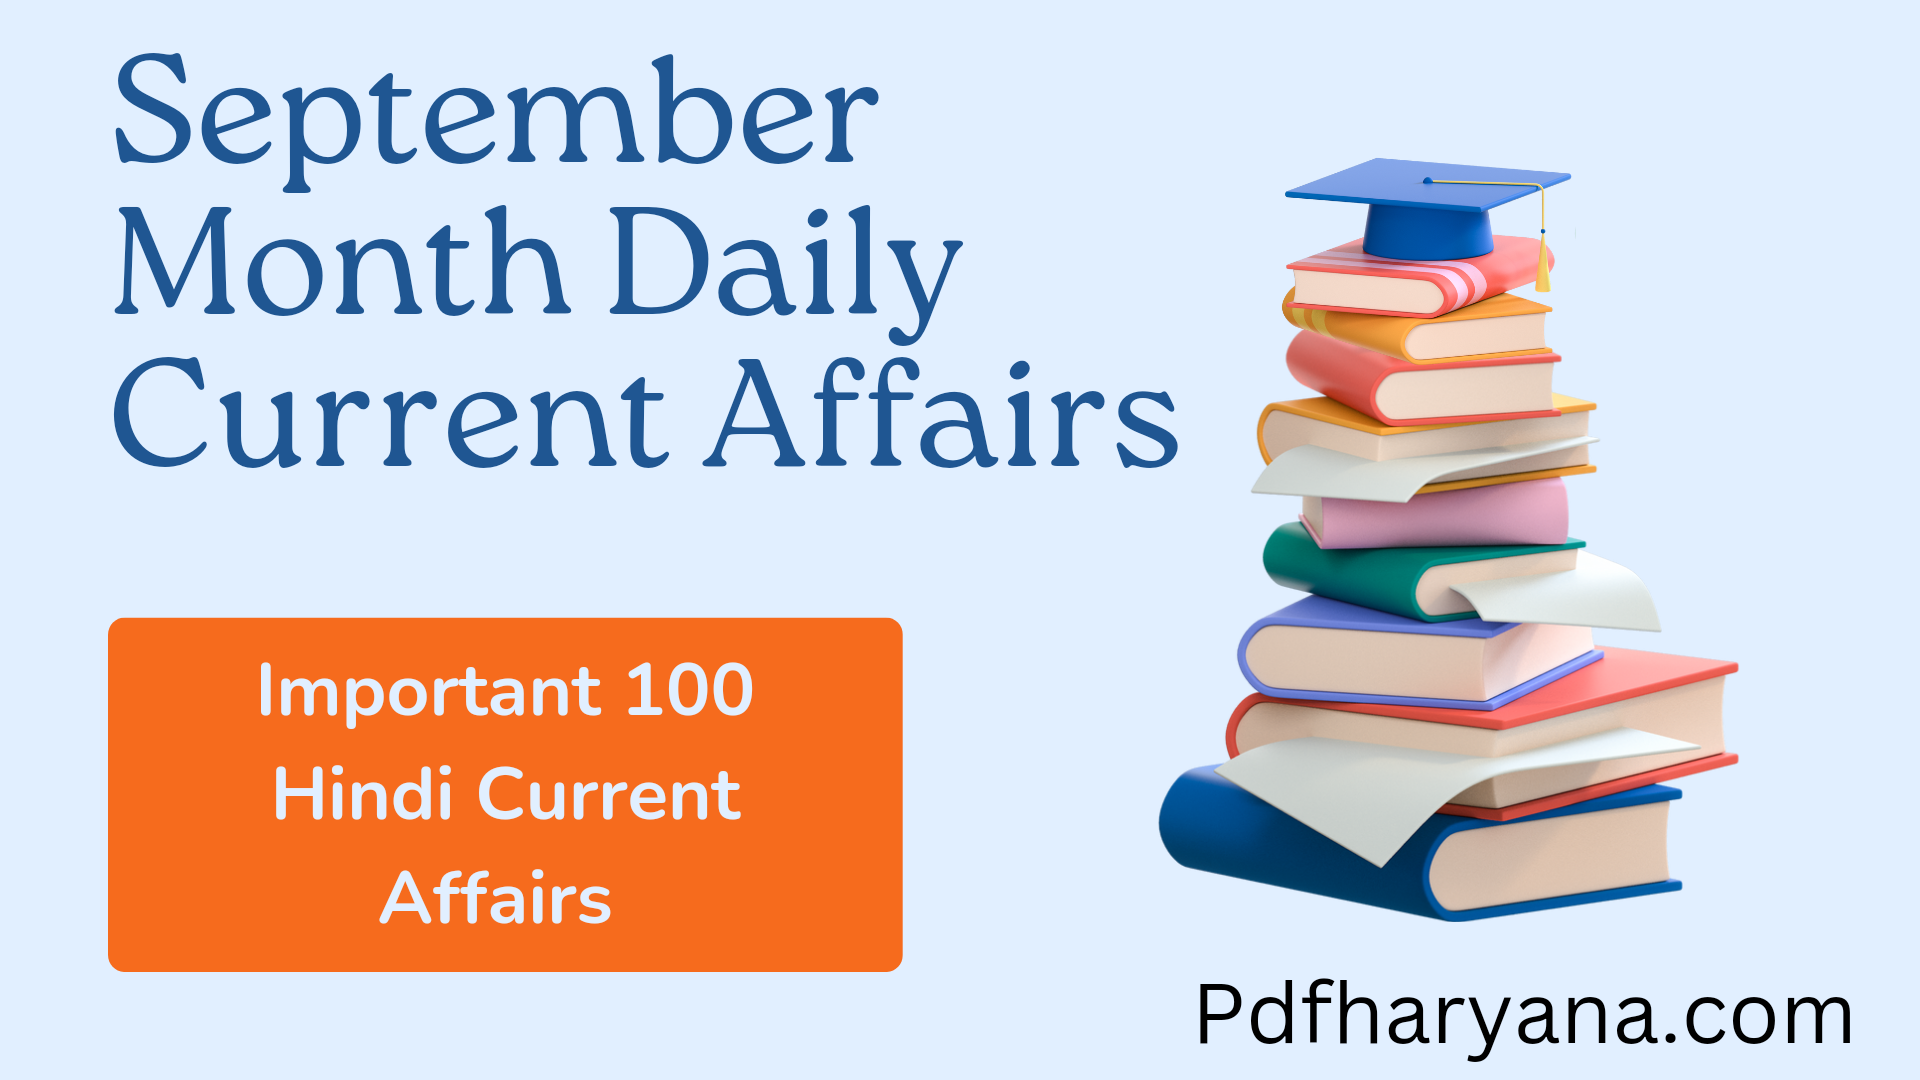 September Month Daily Current Affairs pdfharyana.com current affairs